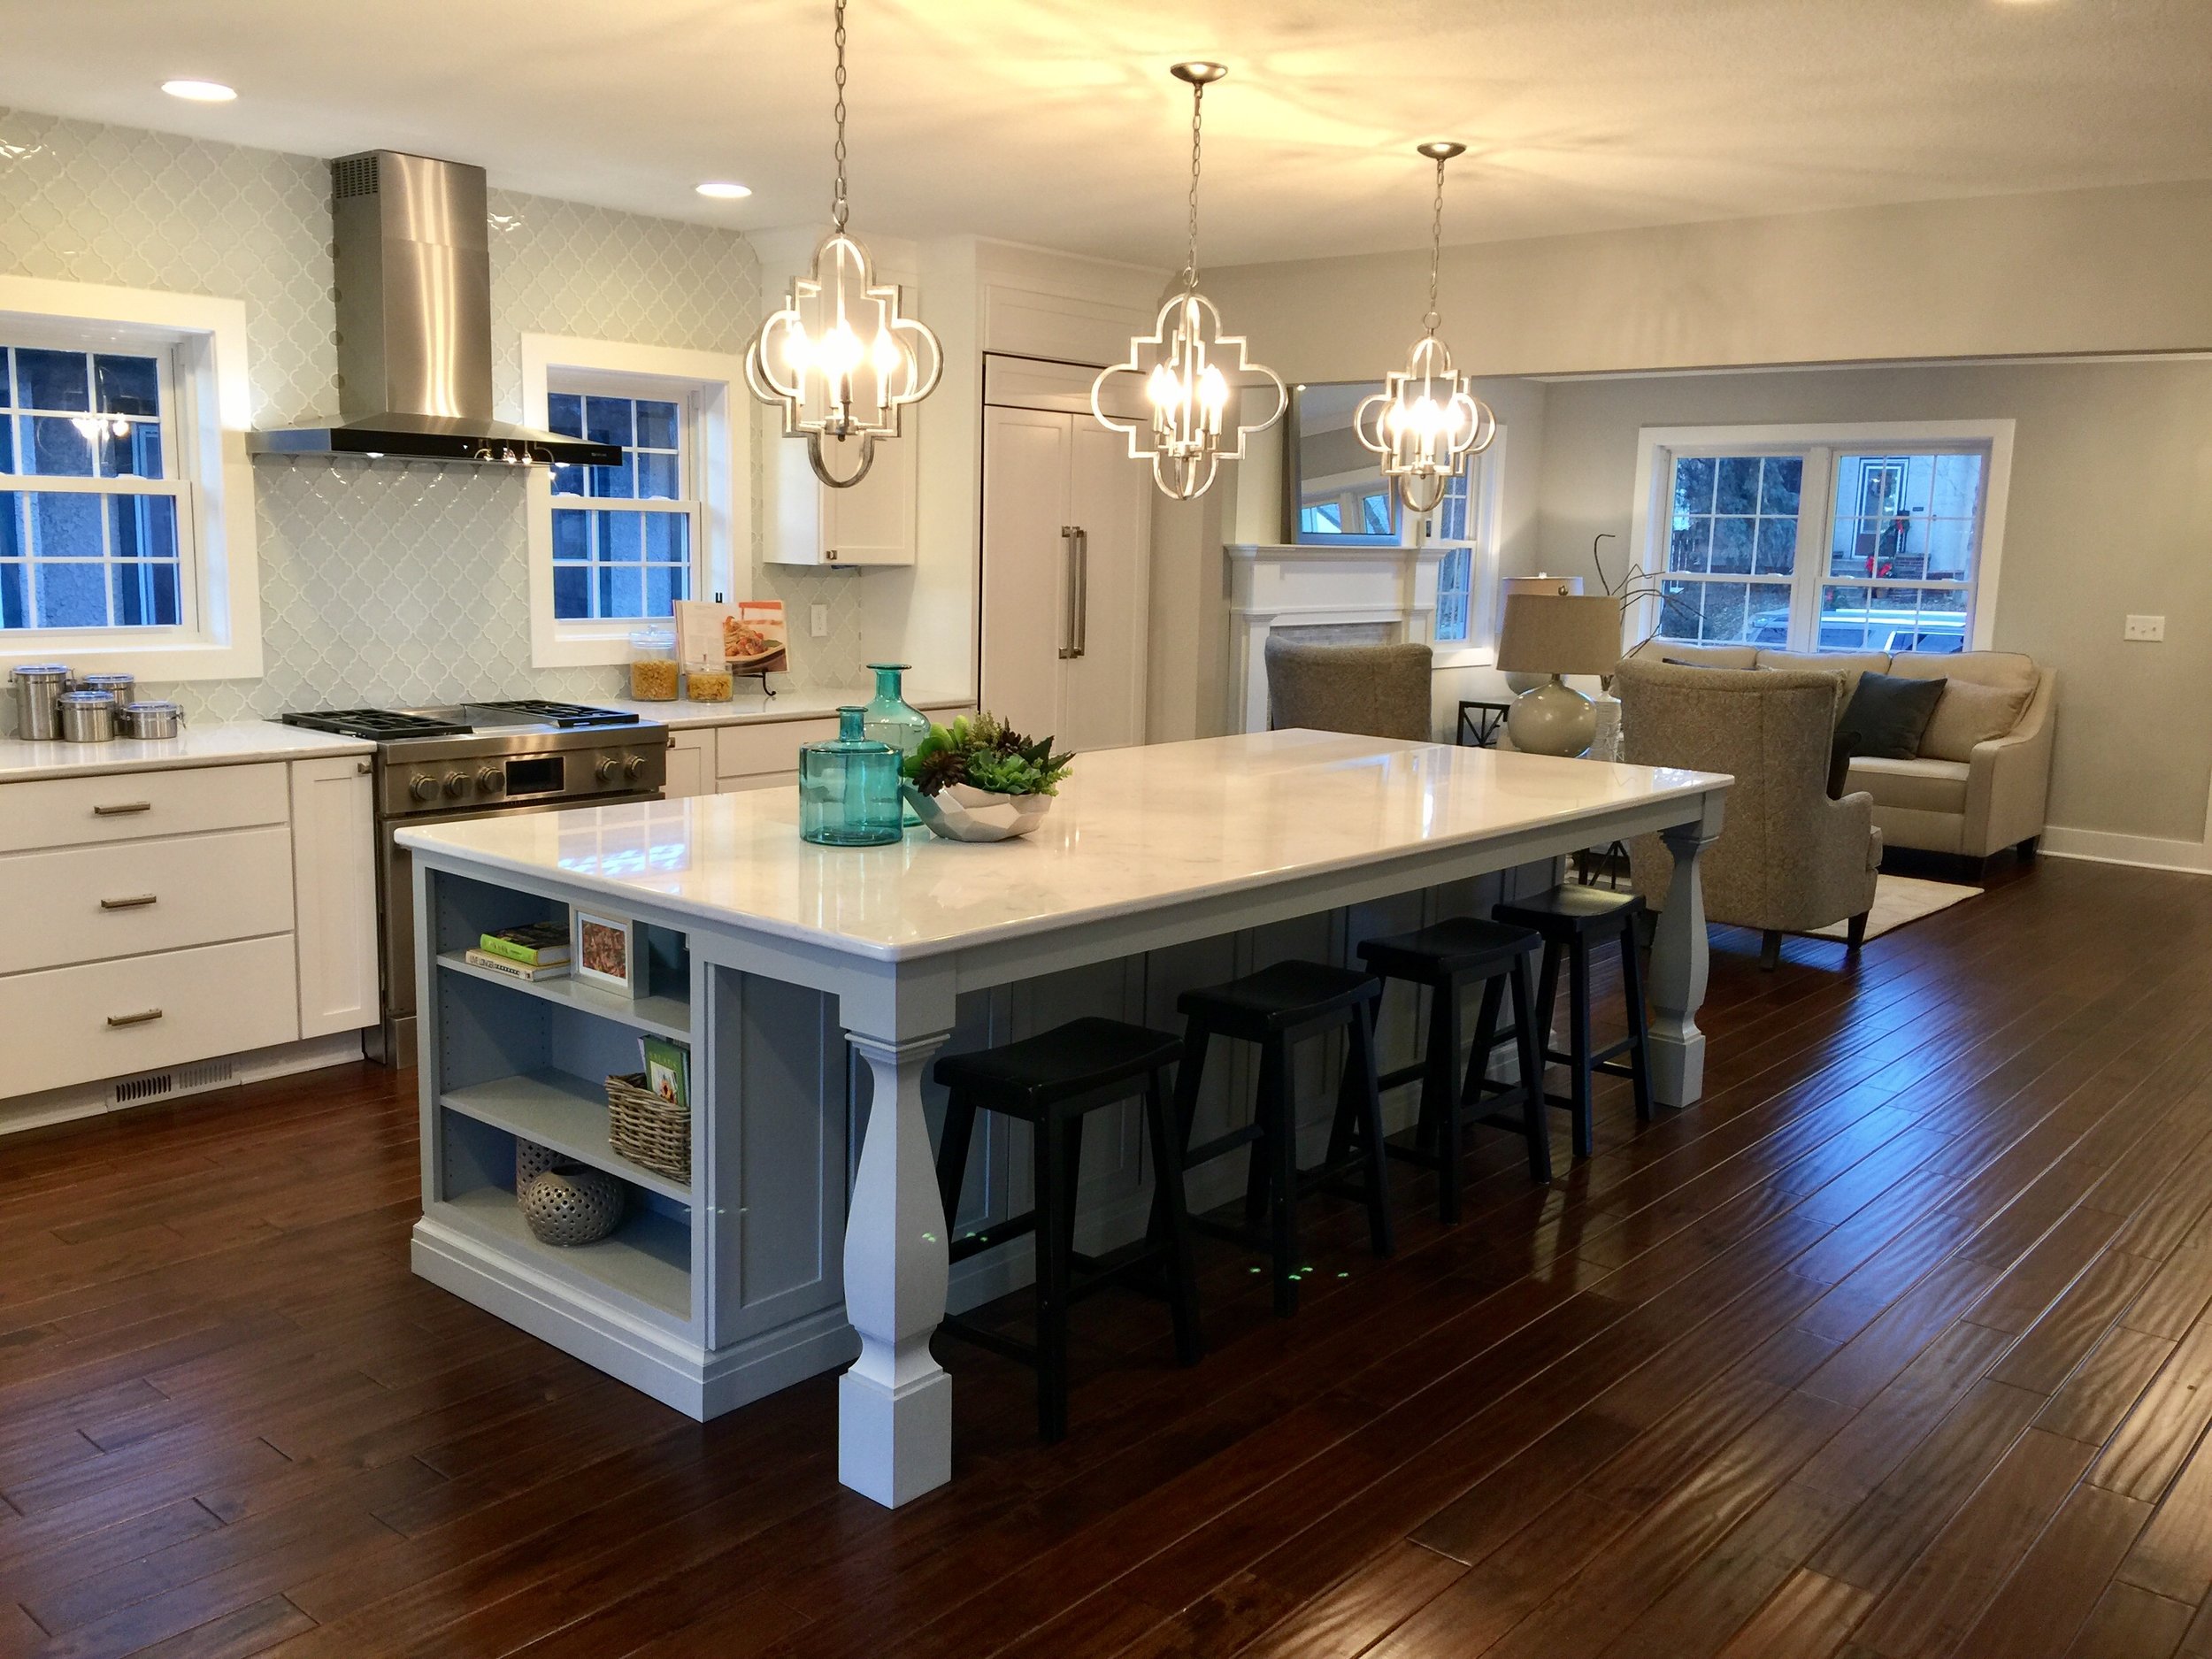 How To Choose The Best Pendant Lighting, Best Lighting For Over Kitchen Island